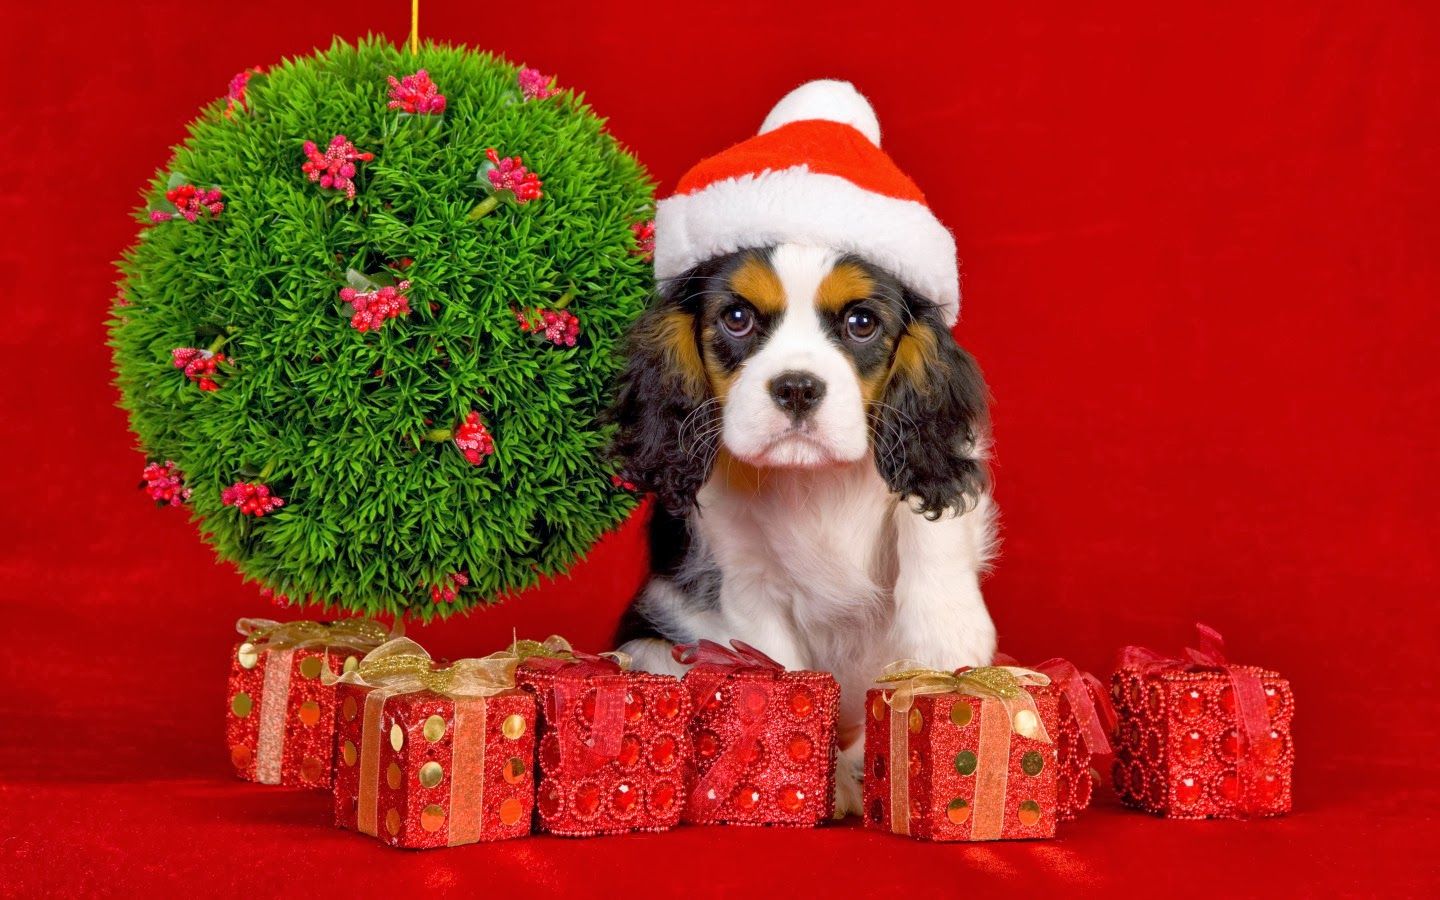 Desktop picture of dogs at christmas wallpaper